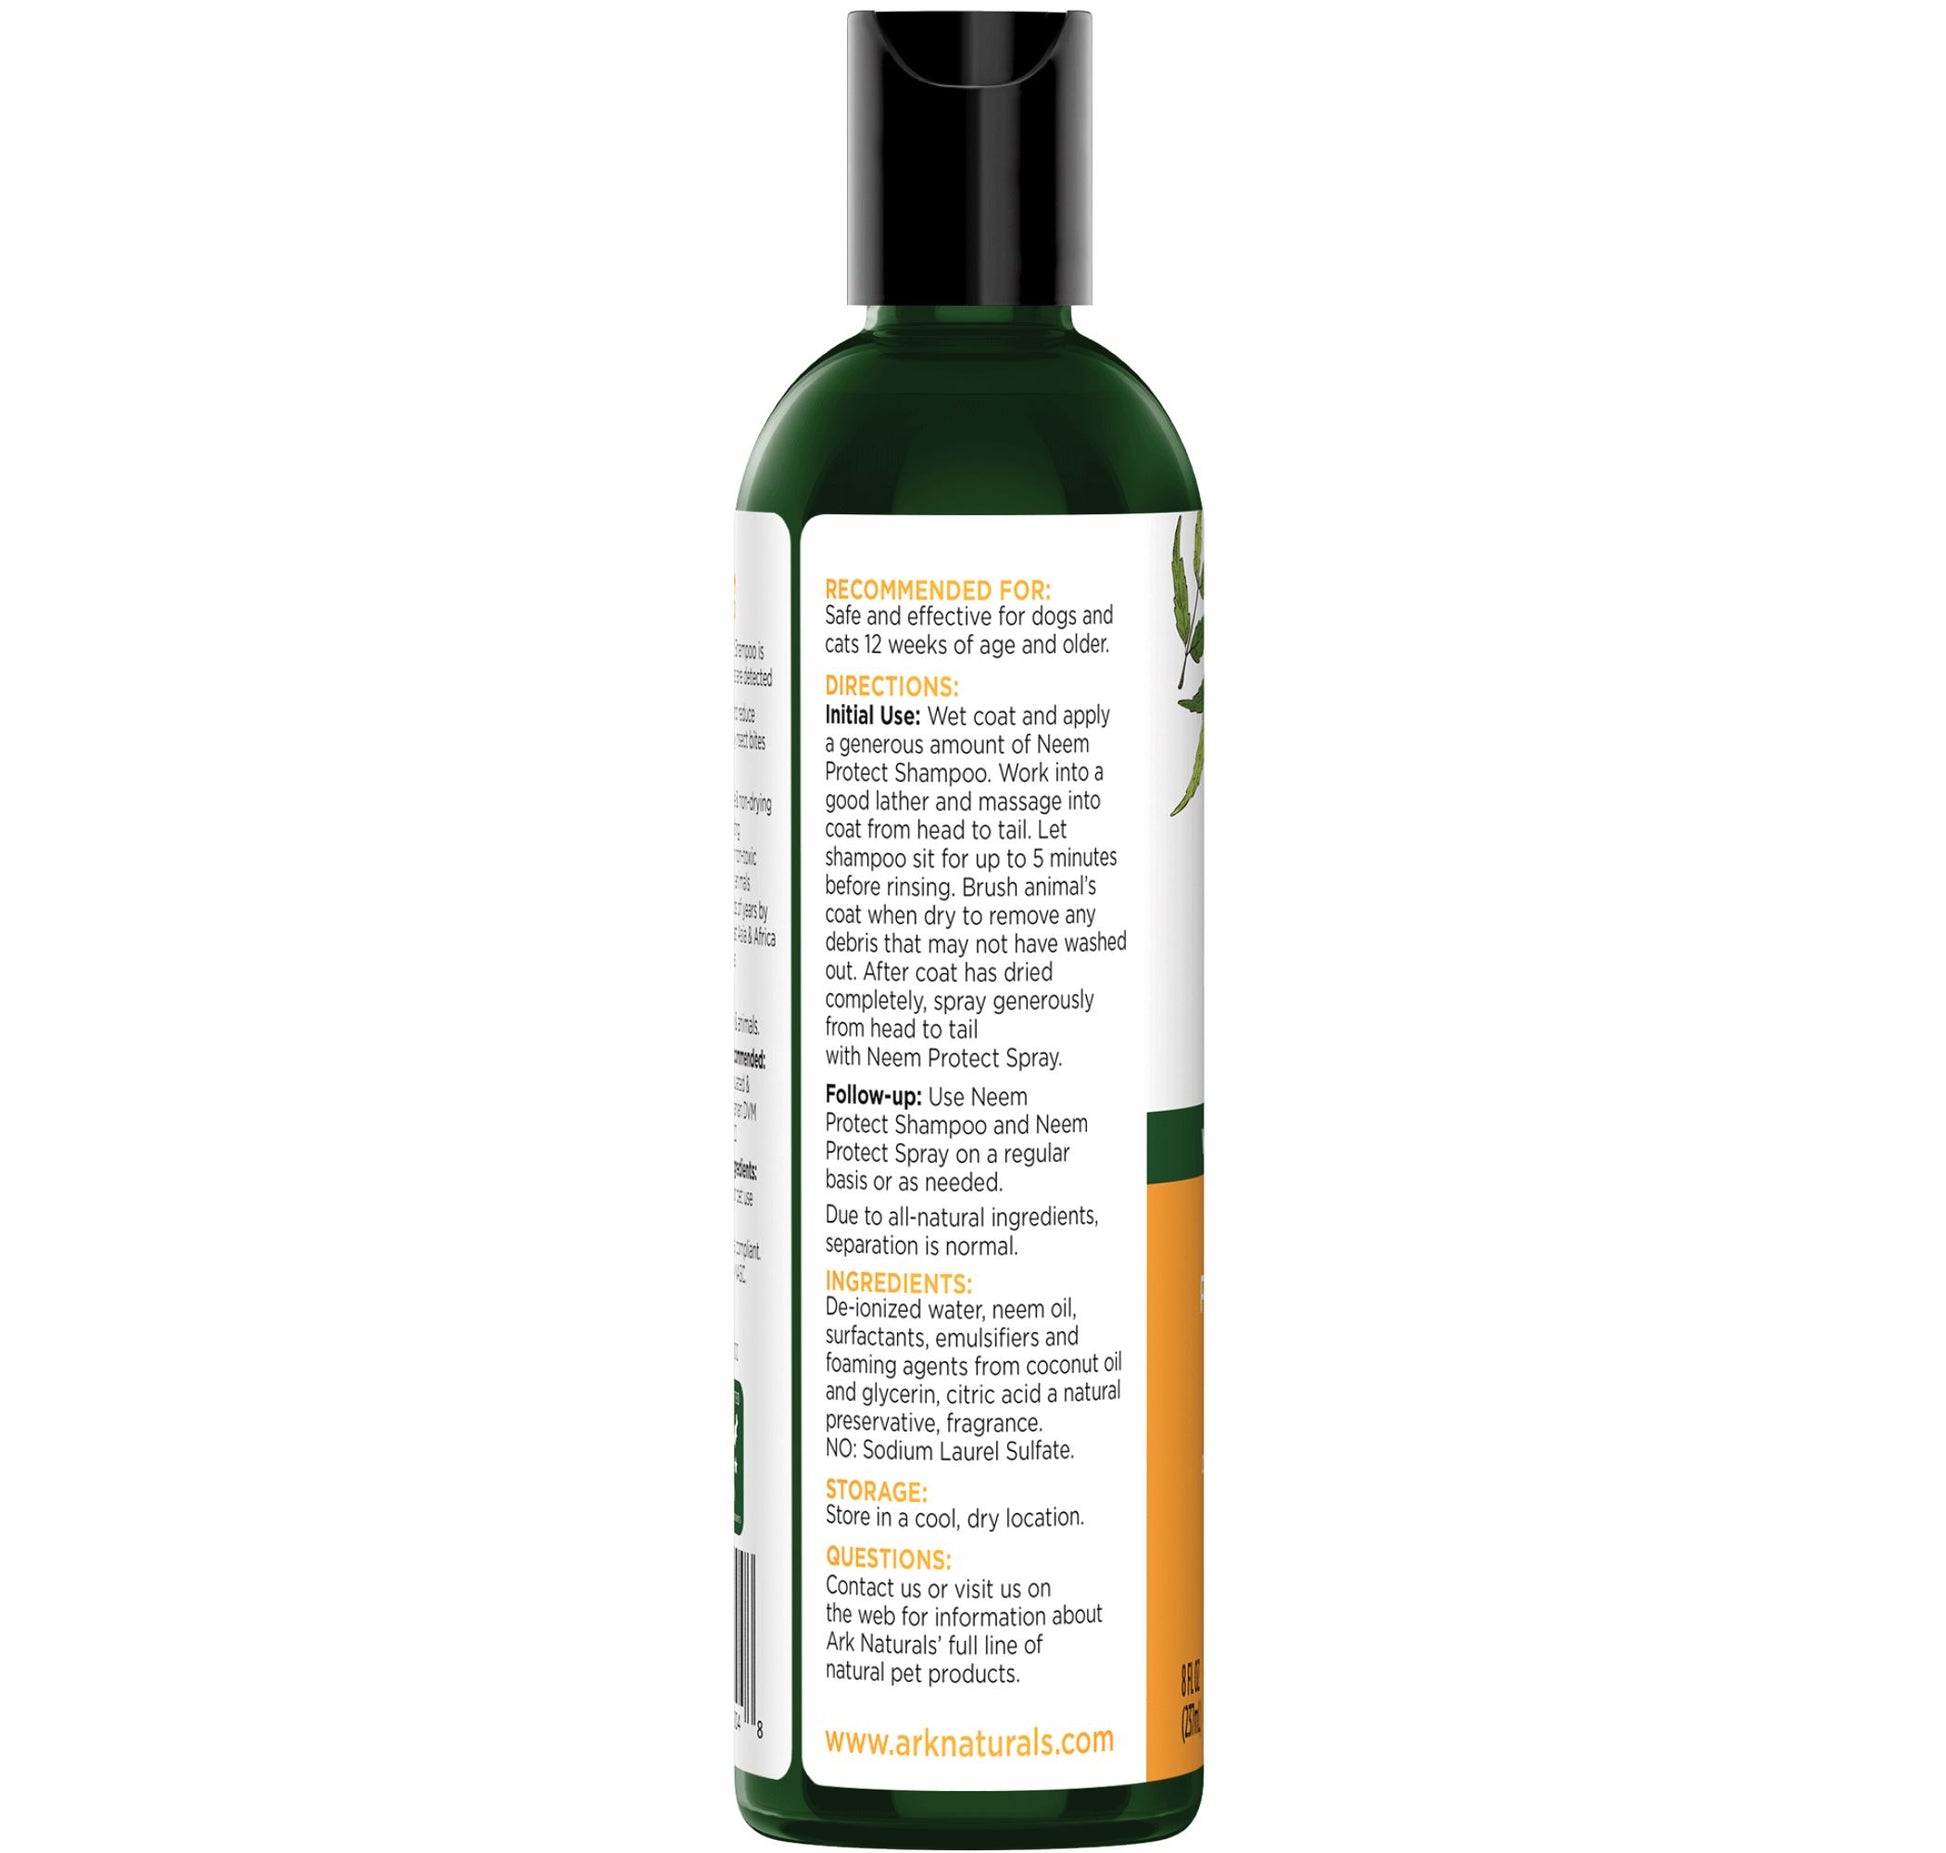 Ark Naturals Neem Protect Shampoo For Cats & Dogs